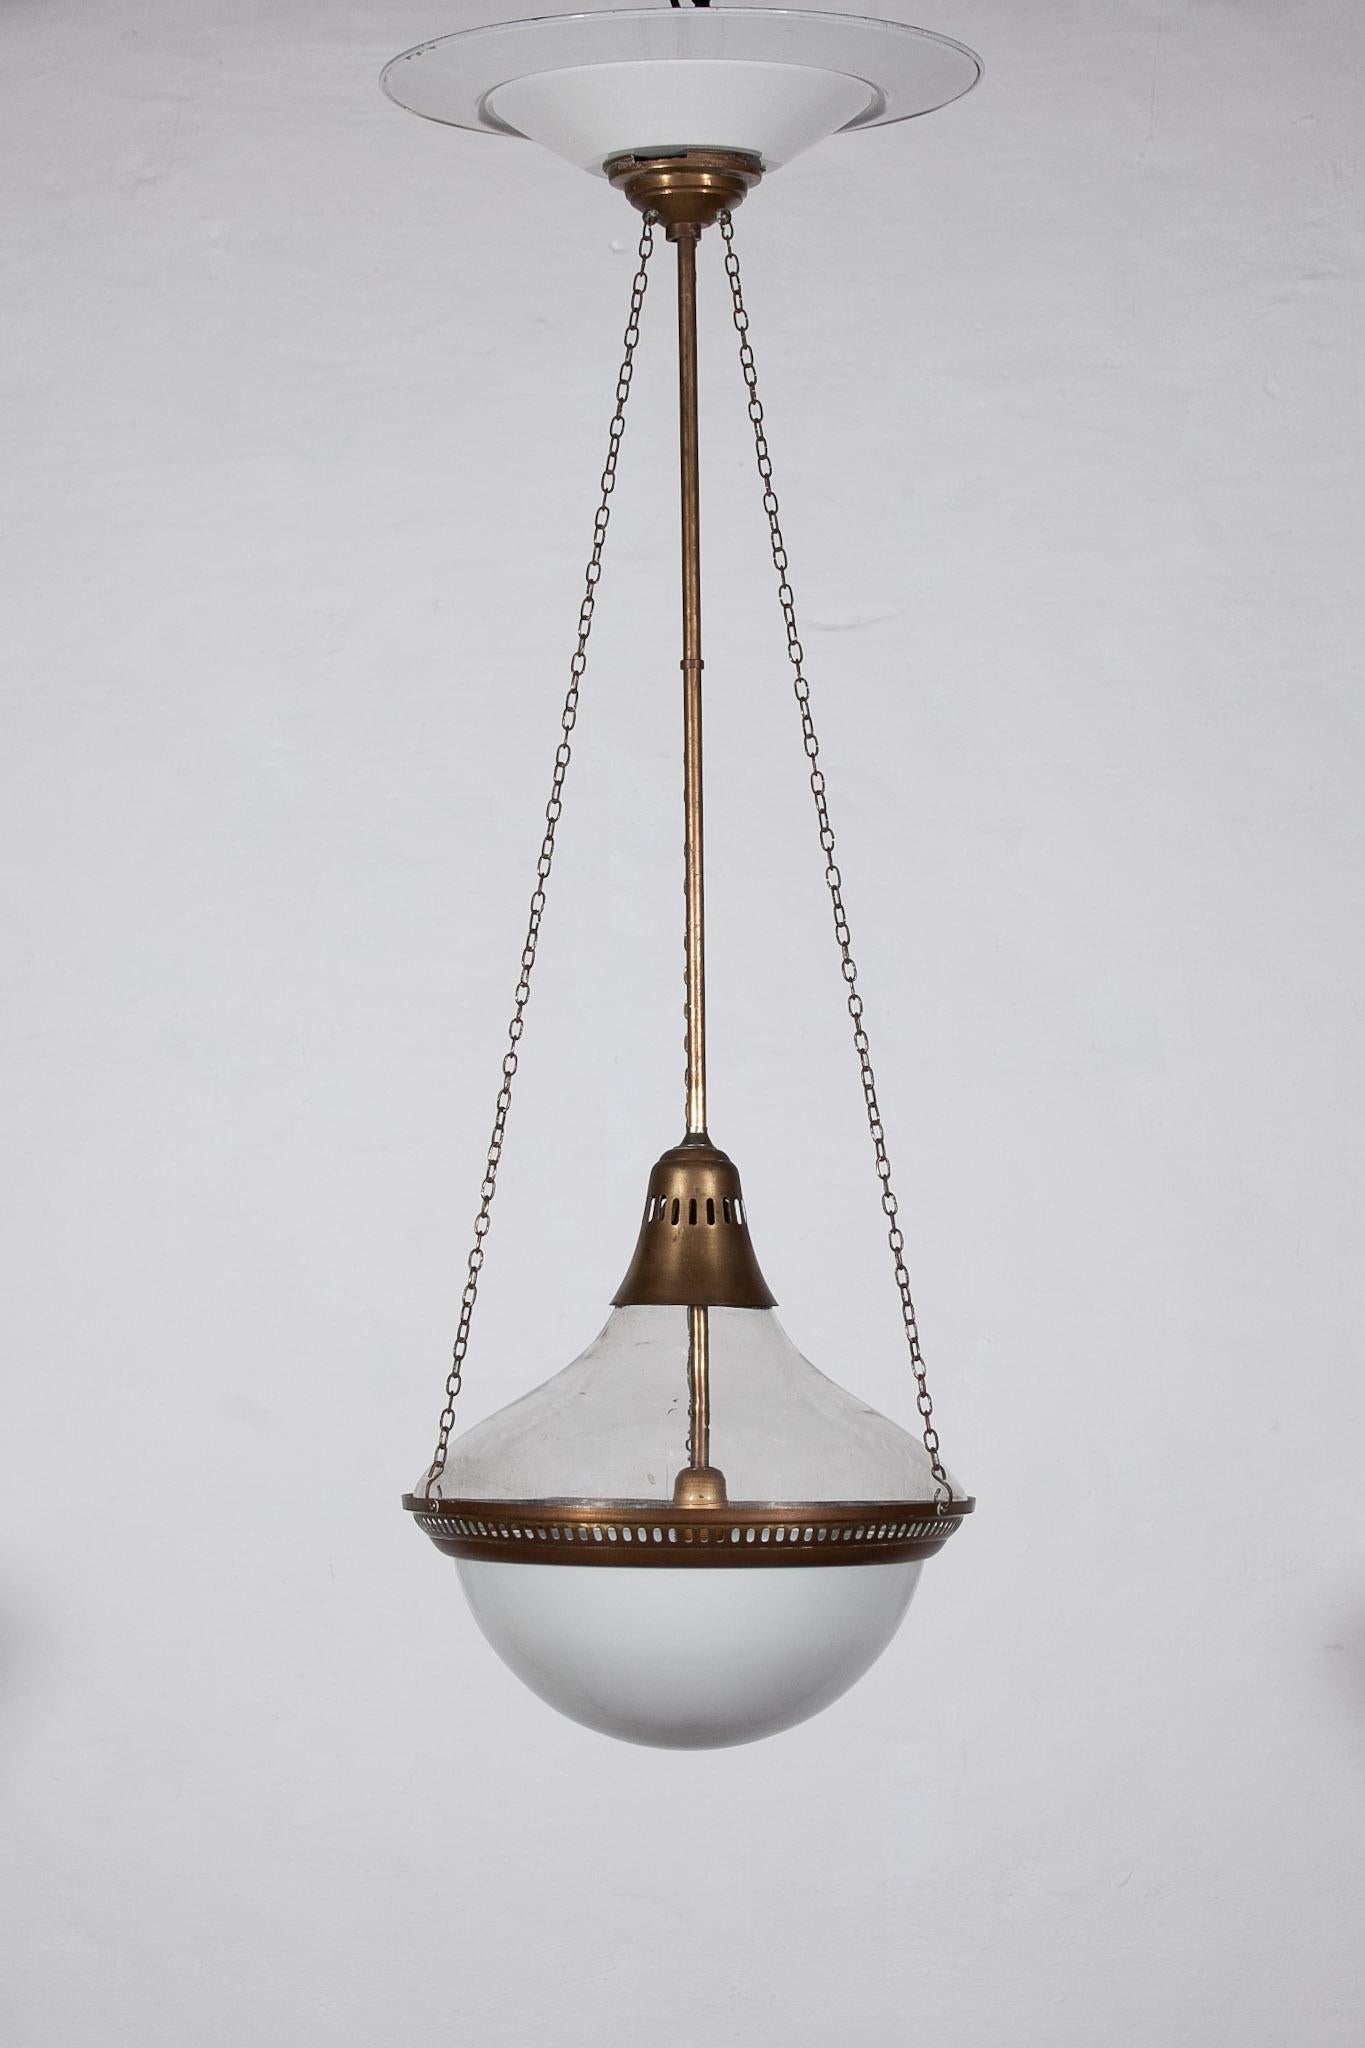 The large antique hanging lamp was designed for Siemens. The lamp is complete original with a nice combination of a clear glass upper shade and a frosted glass lower shade. All metal parts are complete and original. The lamp is in good vintage